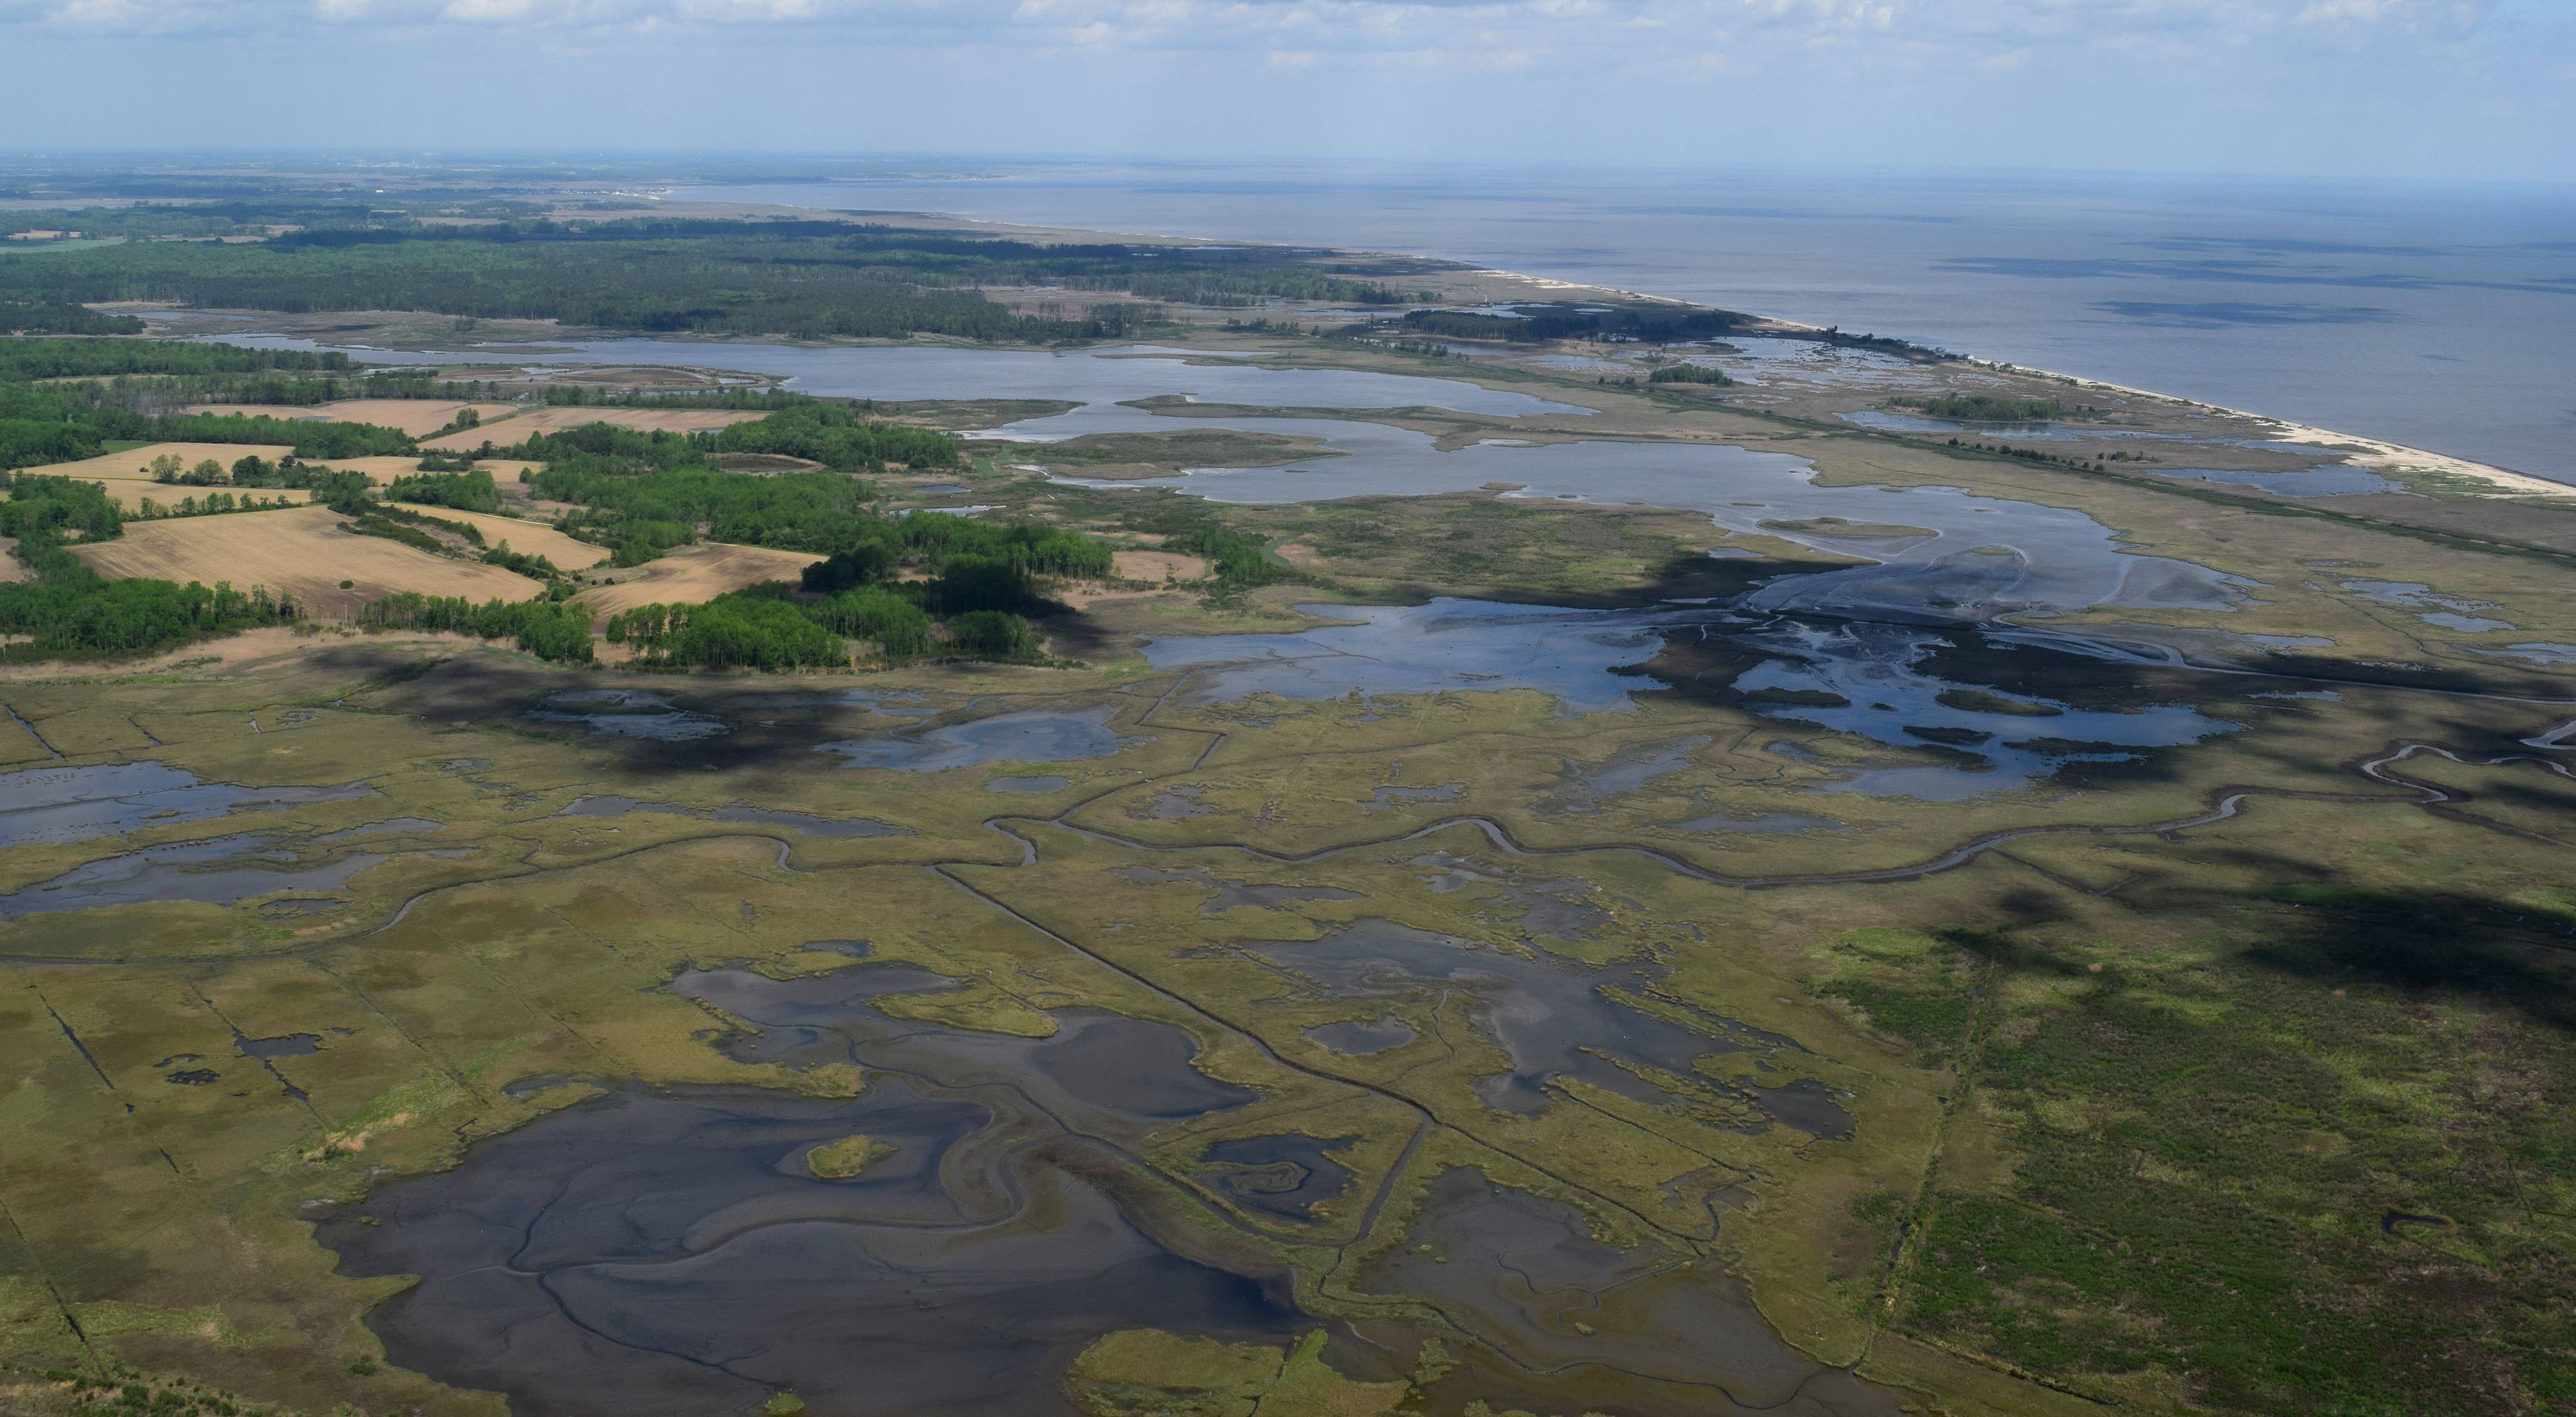 Aerial view looking down on tidal marshlands. Creeks and channels wind through the wetlands. A thin strip of beach provides a buffer from the ocean. 